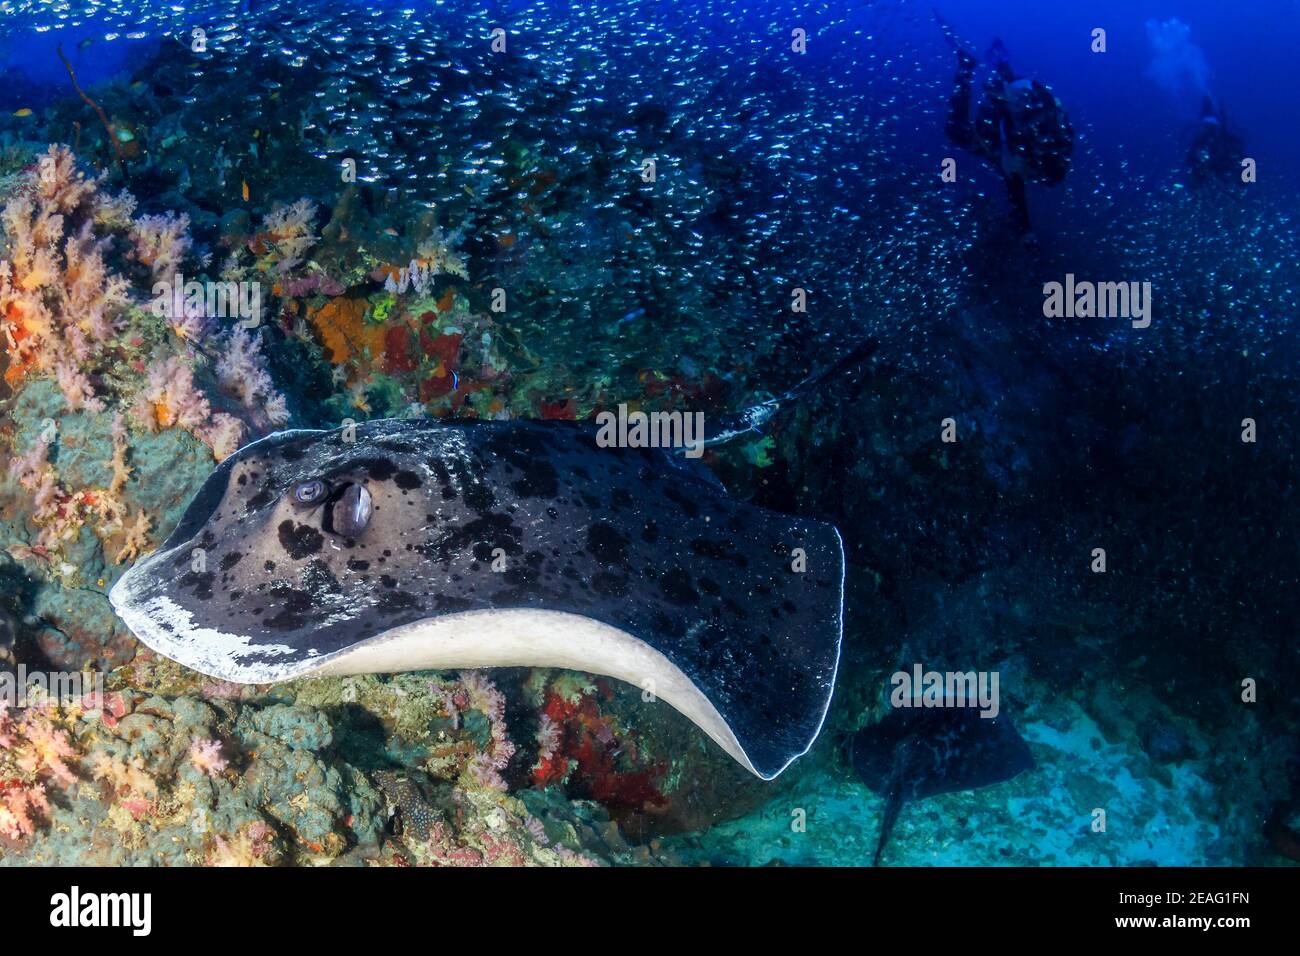 Huge Marble Ray on a tropical coral reef with background SCUBA divers. Stock Photo